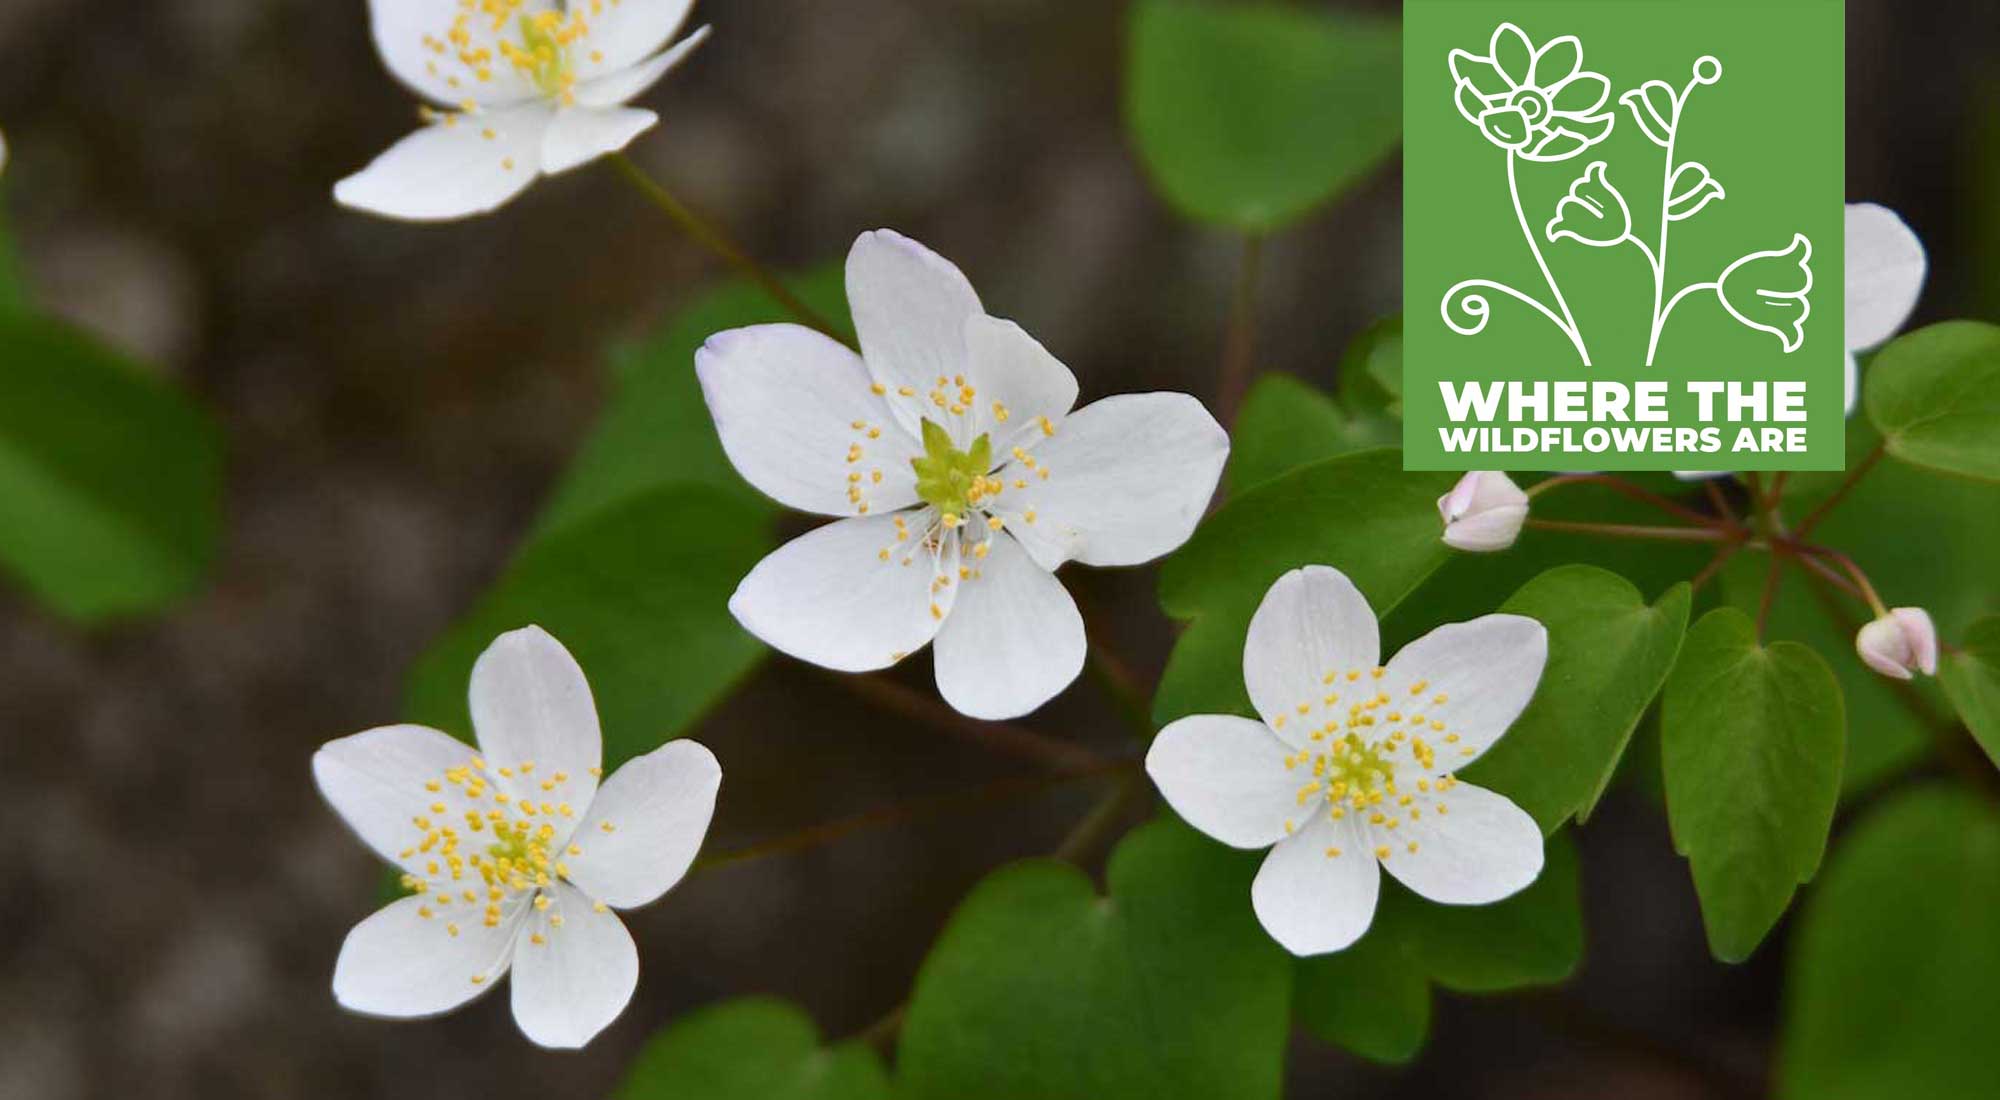 A cluster of white rue anemone blooms.